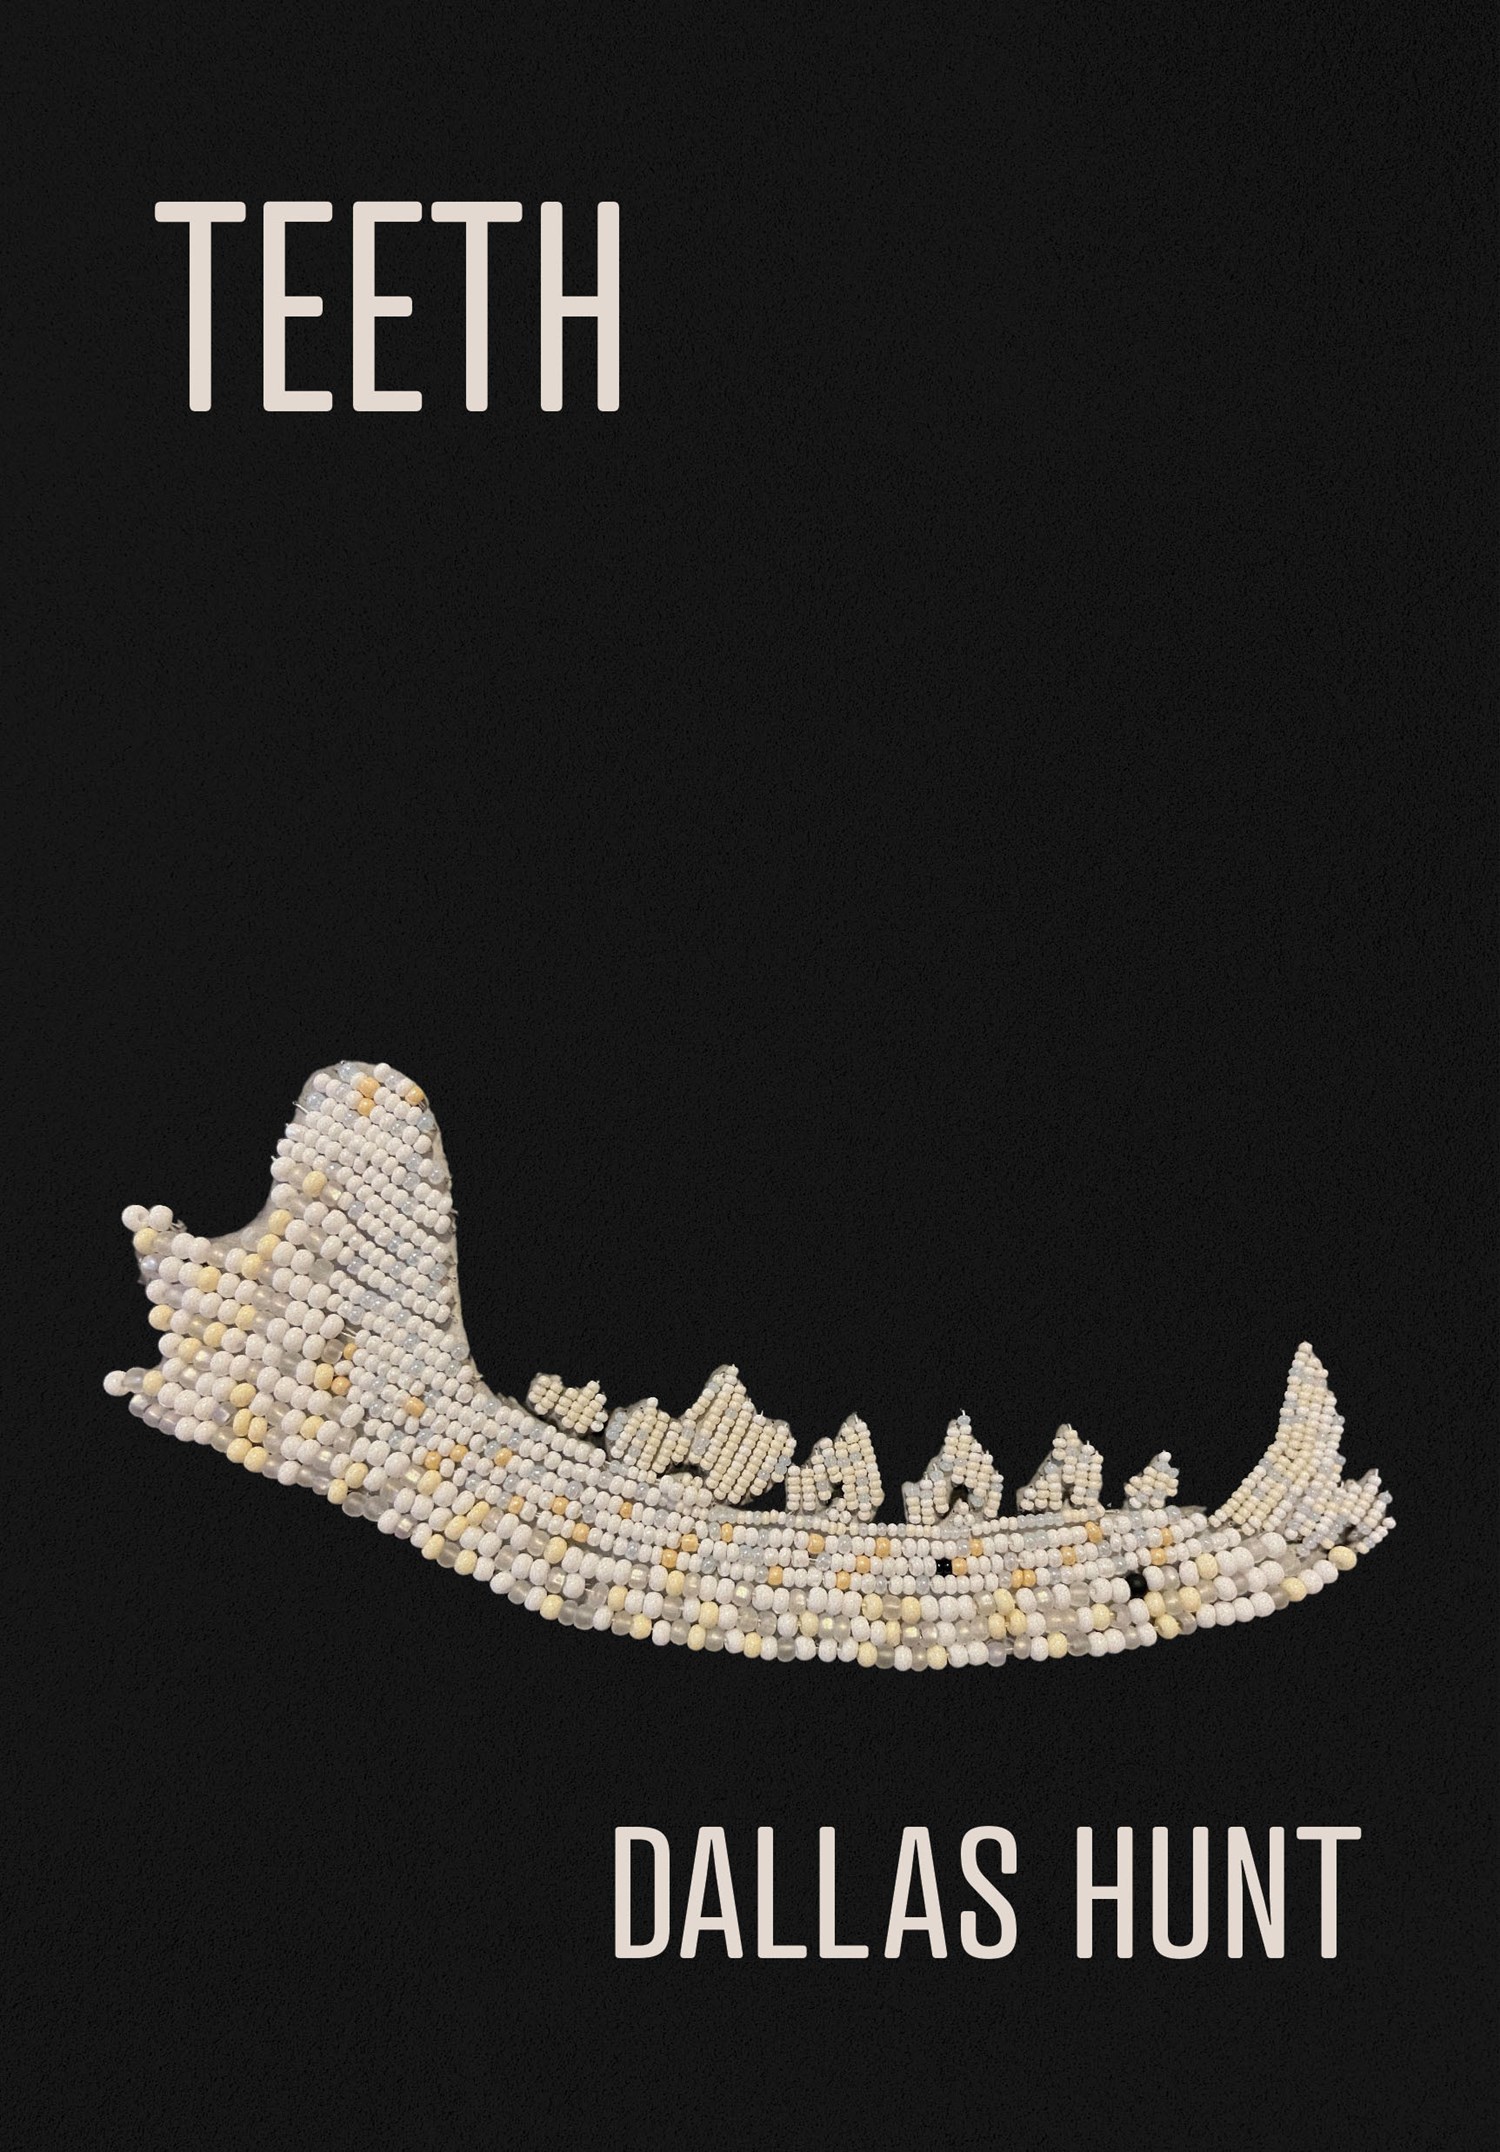 The cover of Teeth by Dallas Hunt.